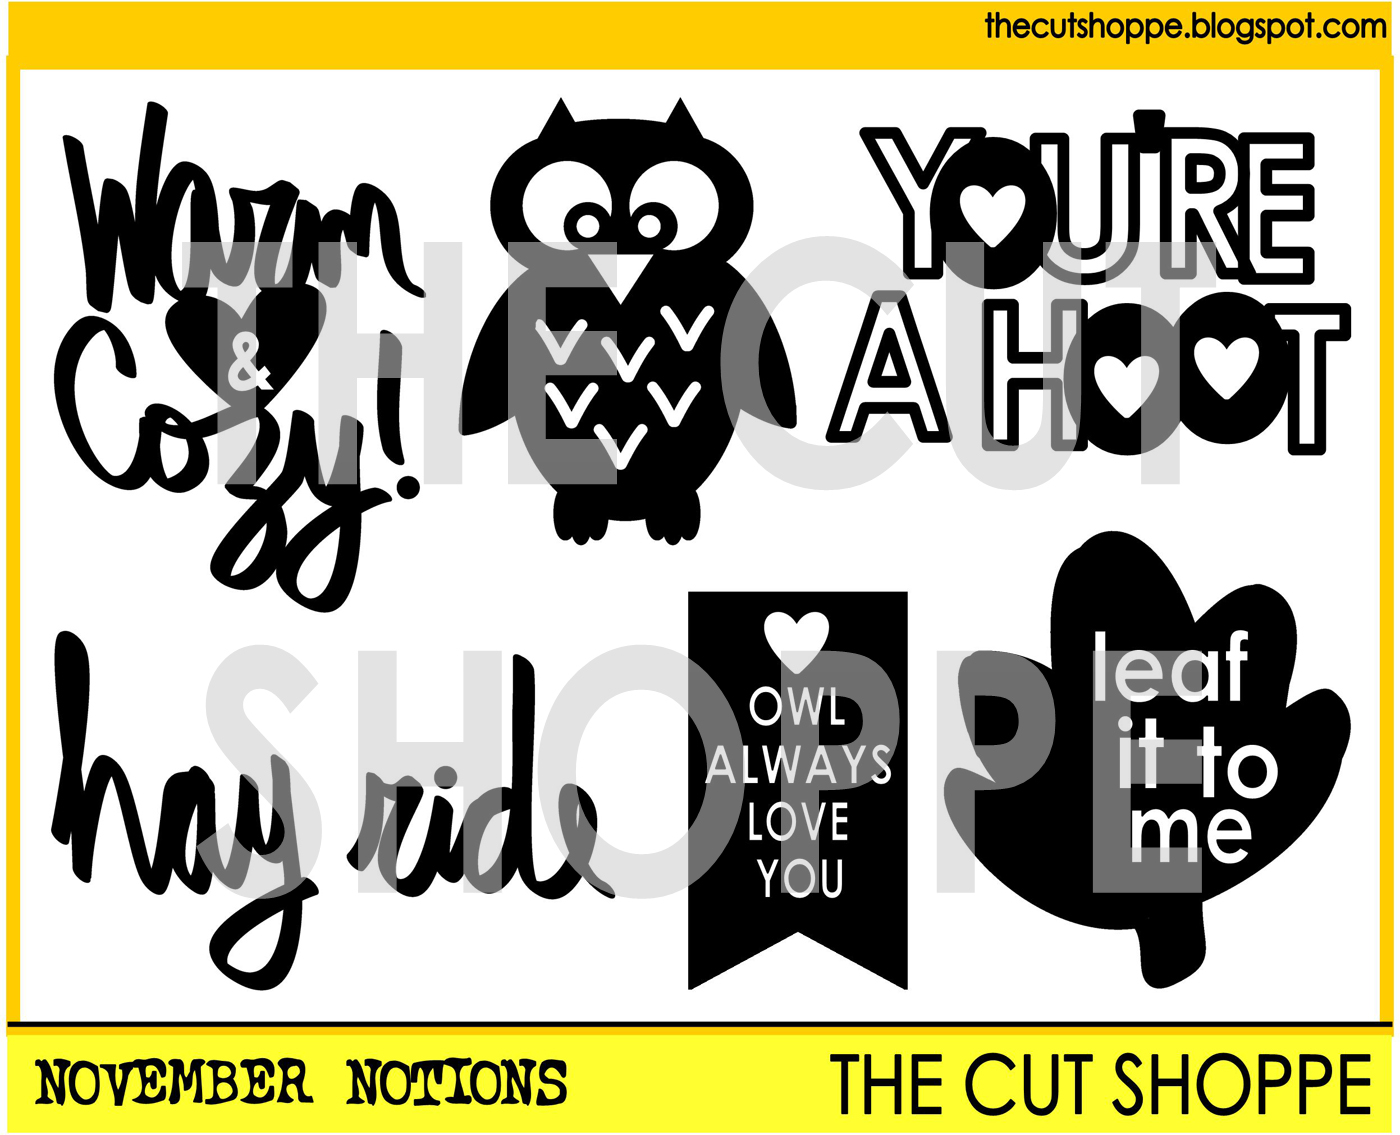 https://www.etsy.com/listing/209028378/the-november-notions-cut-file-includes-6?ref=shop_home_active_3